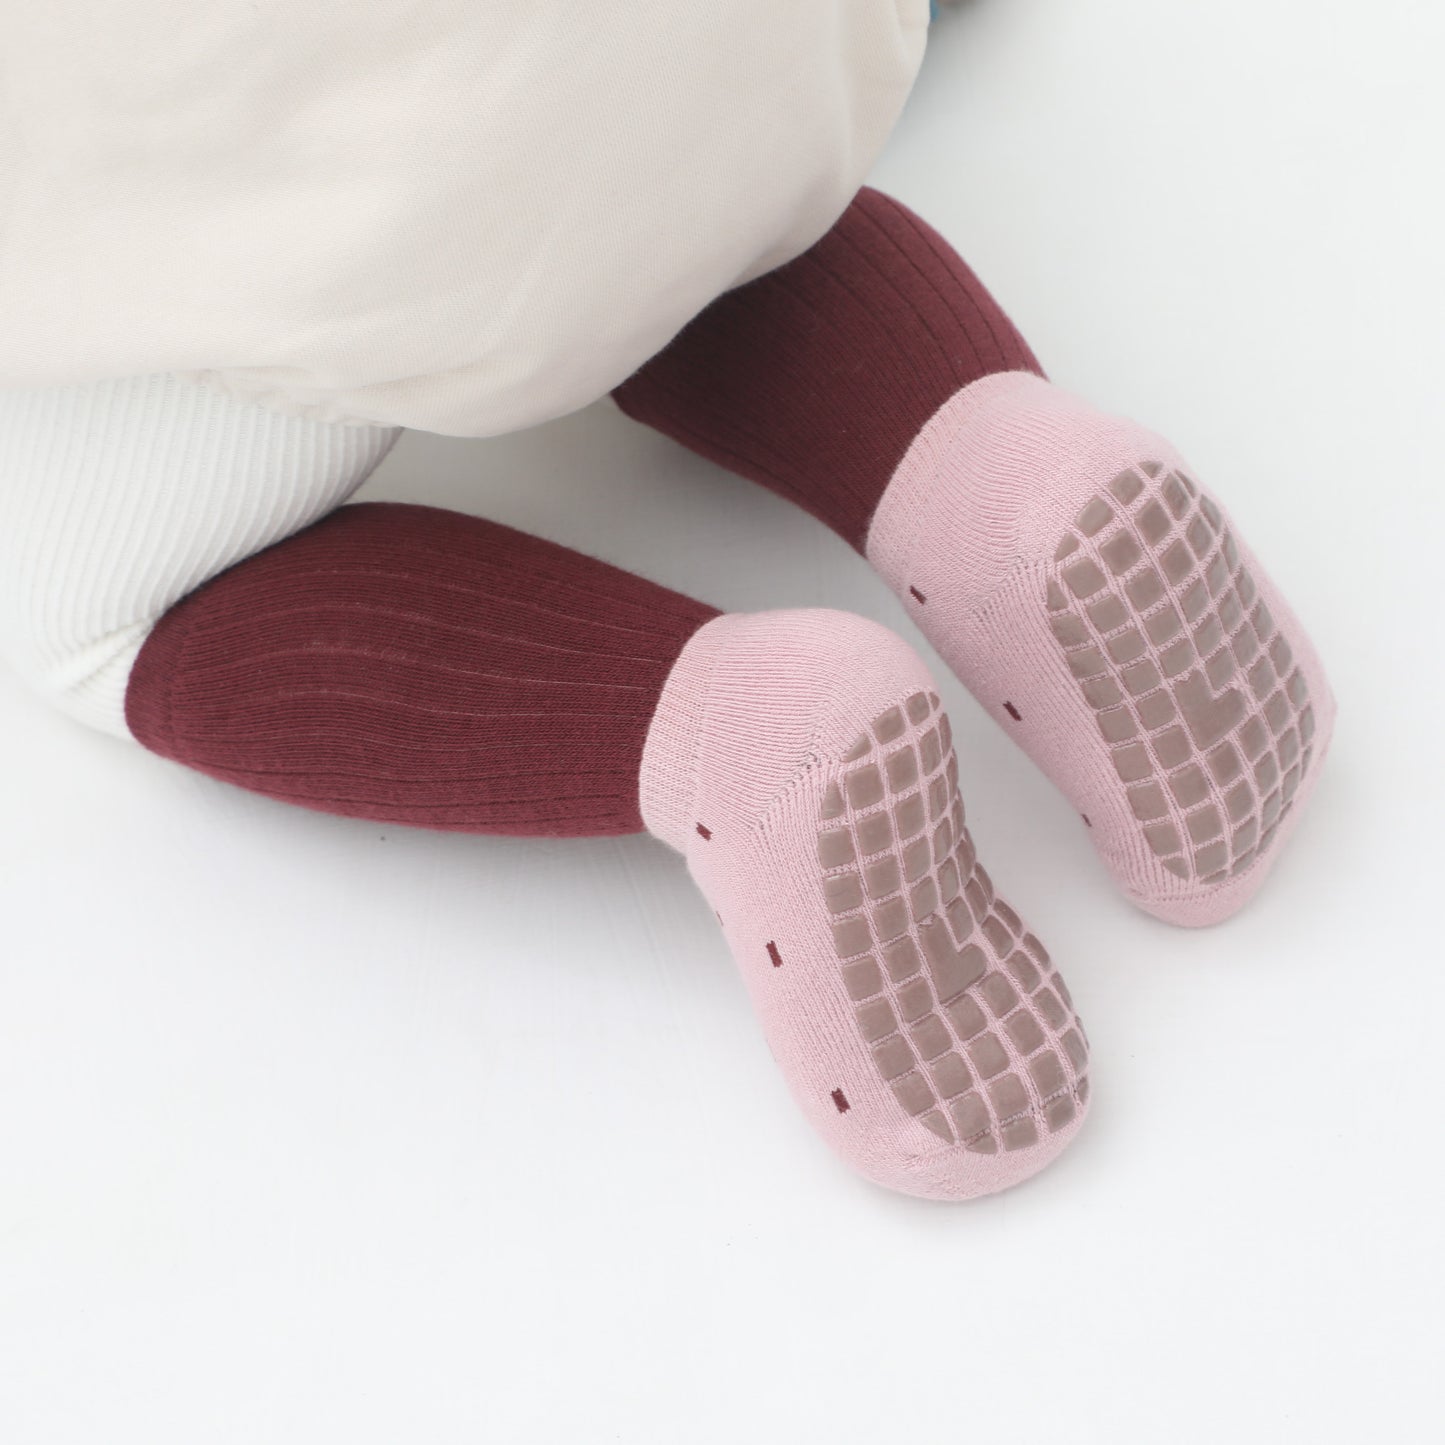 Long & Short - 2 Double Sets (4 pairs) of Stay-On Baby & Toddler Non-Slip Socks